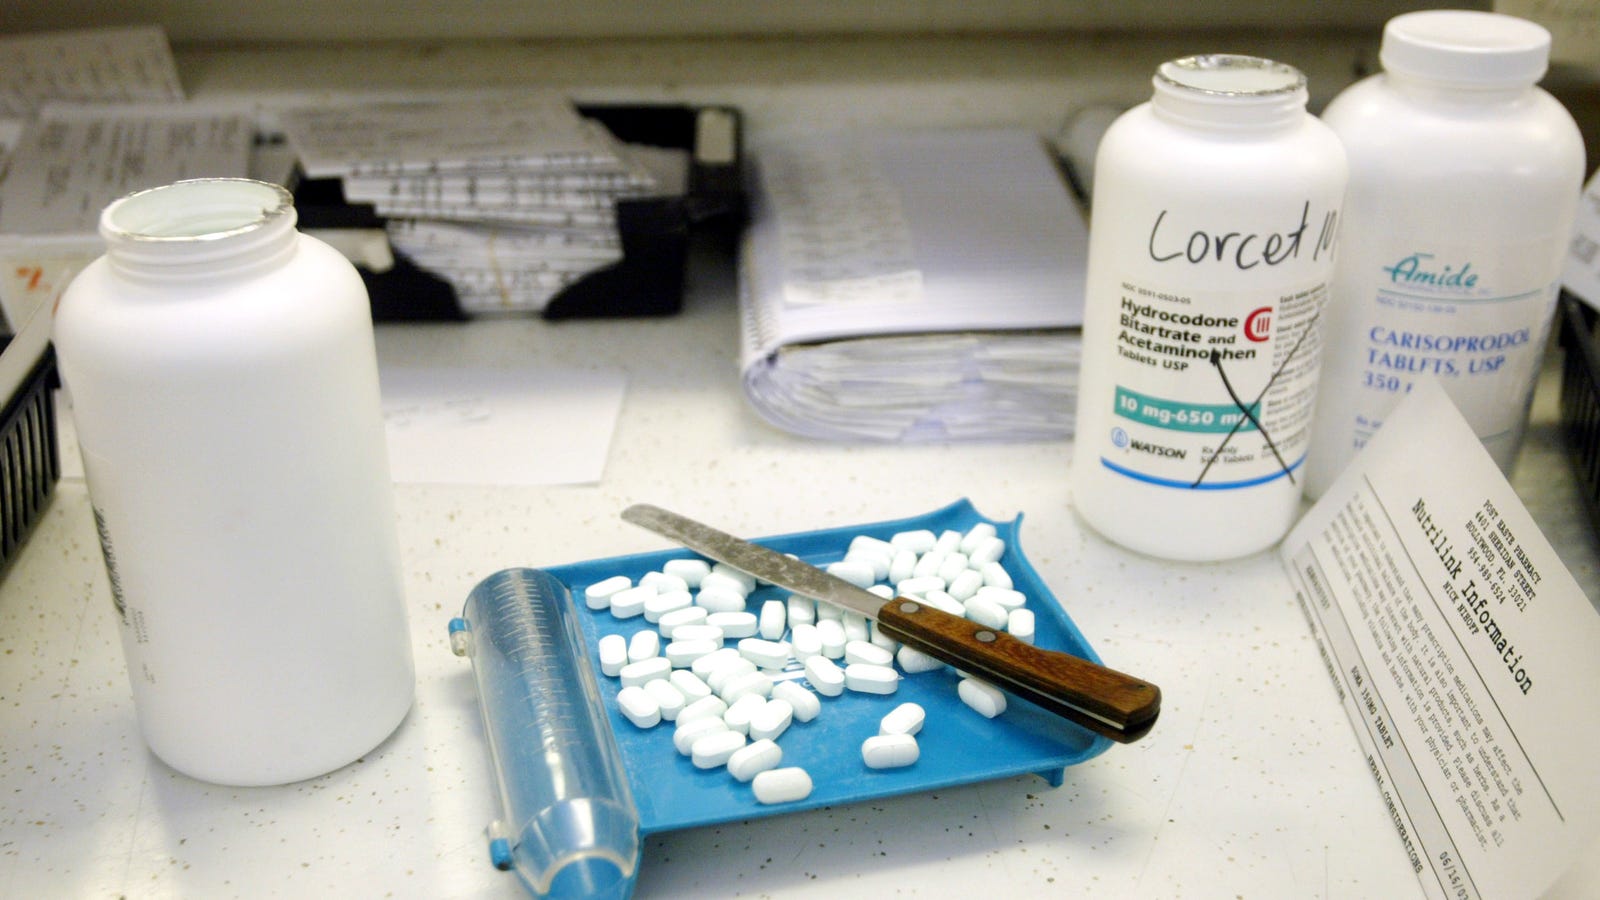 Fed-Up Hospitals Are Starting Their Own Drug Company so They Can Lower Generic Drug Prices